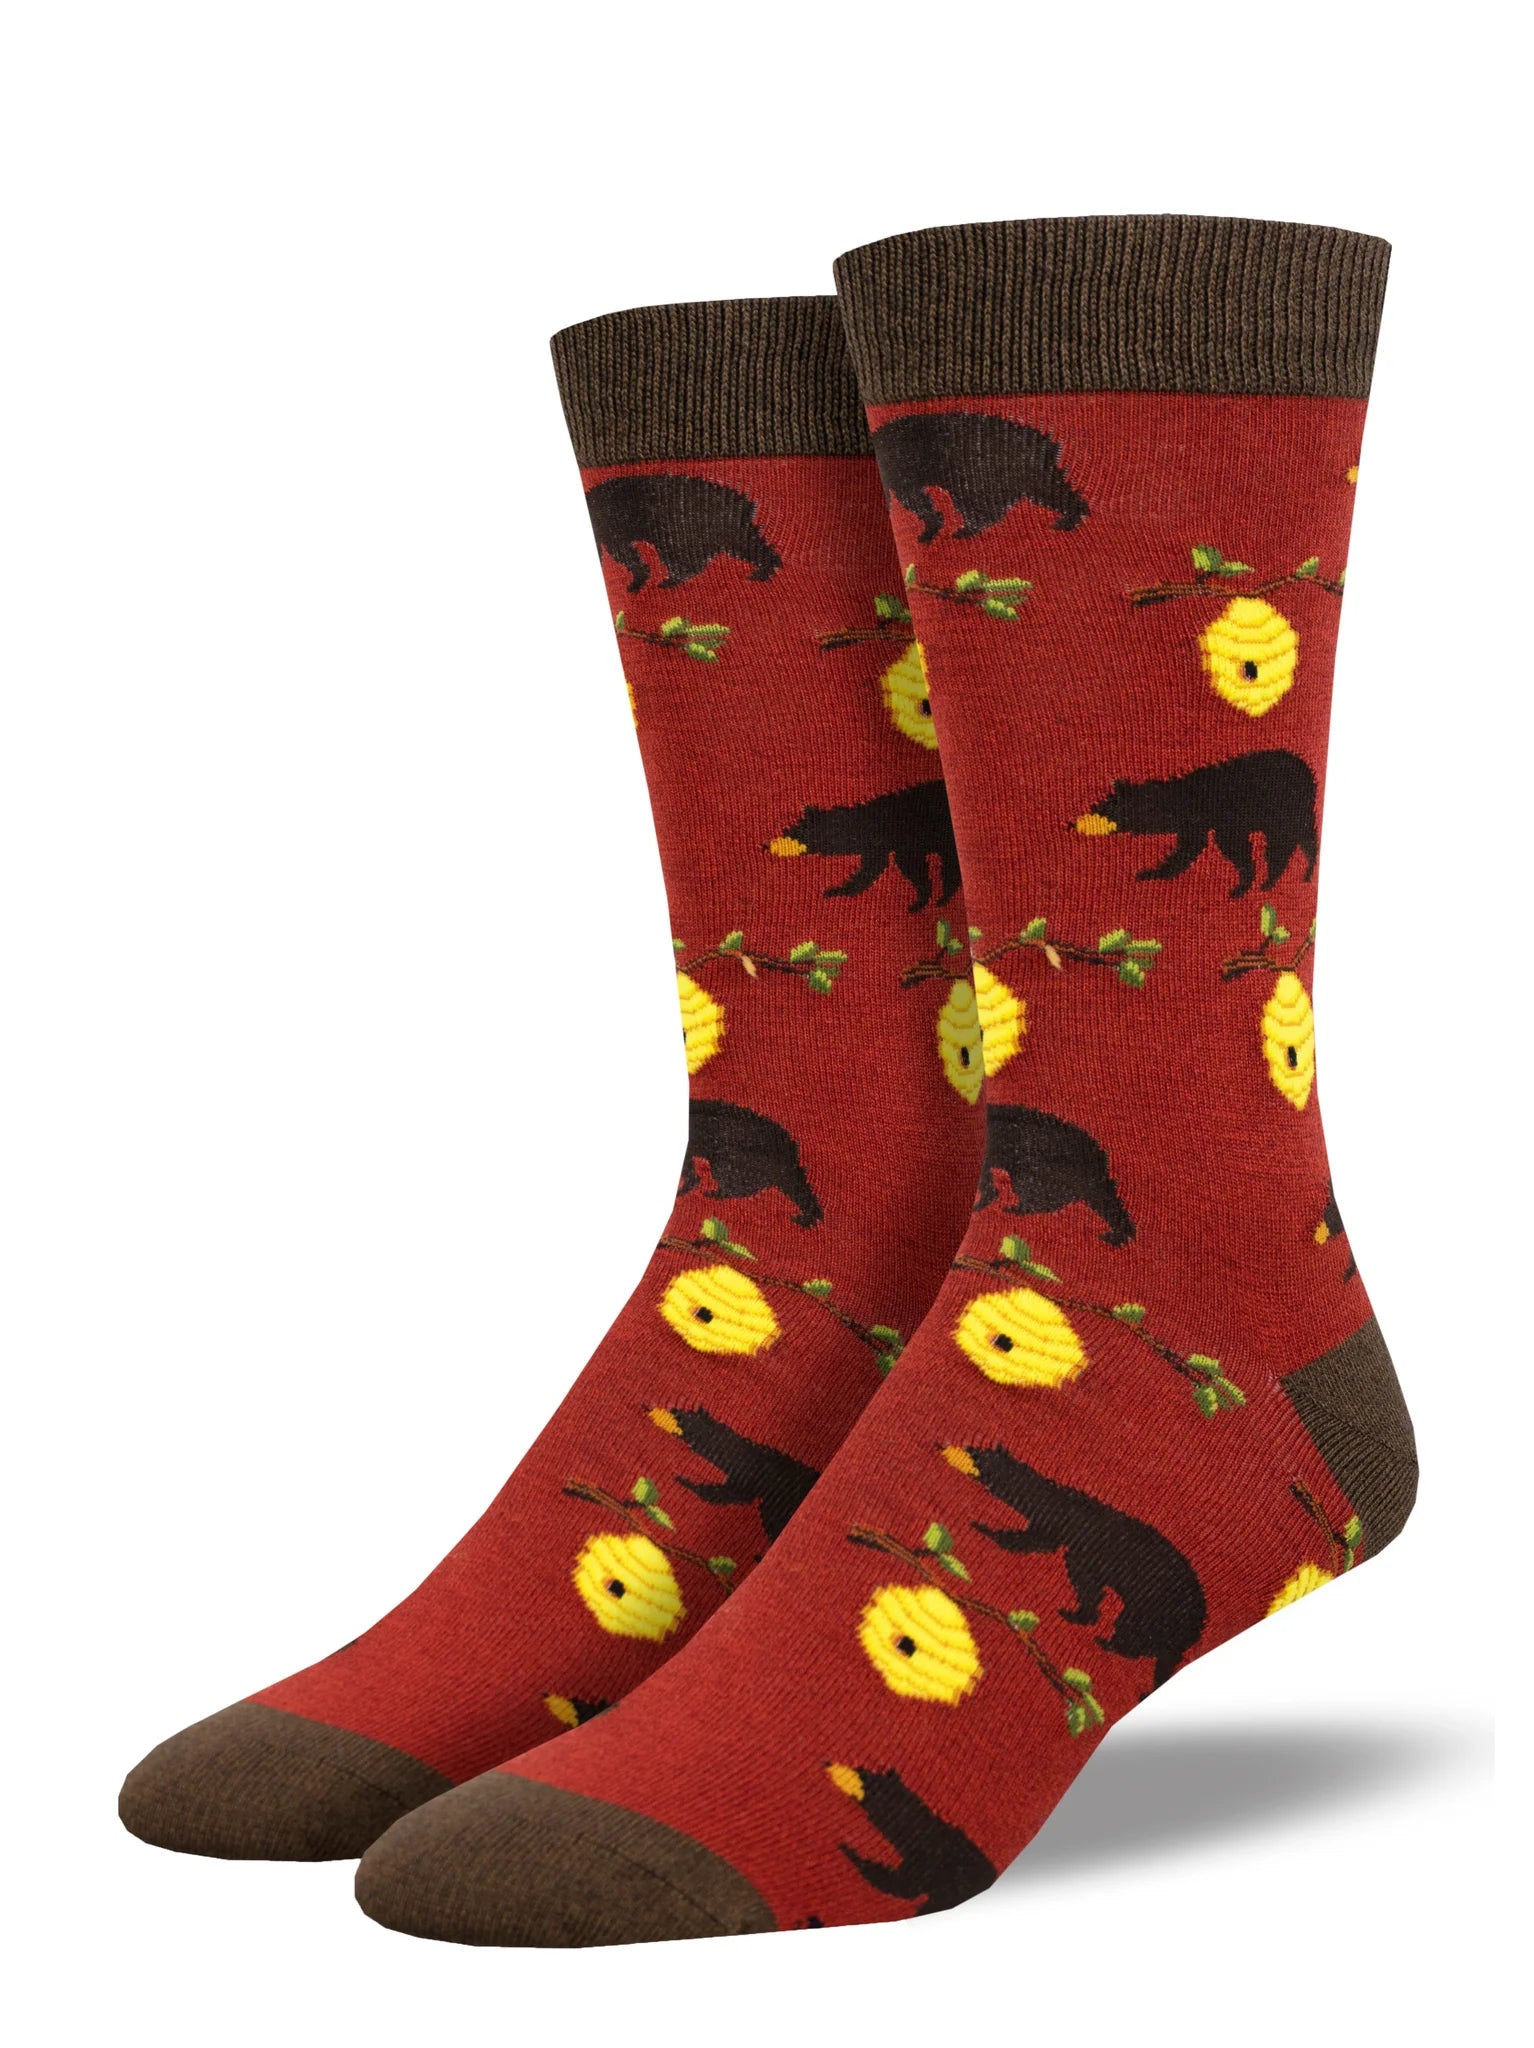 Shown on men's leg froms, a pair of bamboo socks in red with a brown heel, toe, and, cuff. These socks feature an all over motif of grizzly bears and honey bee hives on a branch.